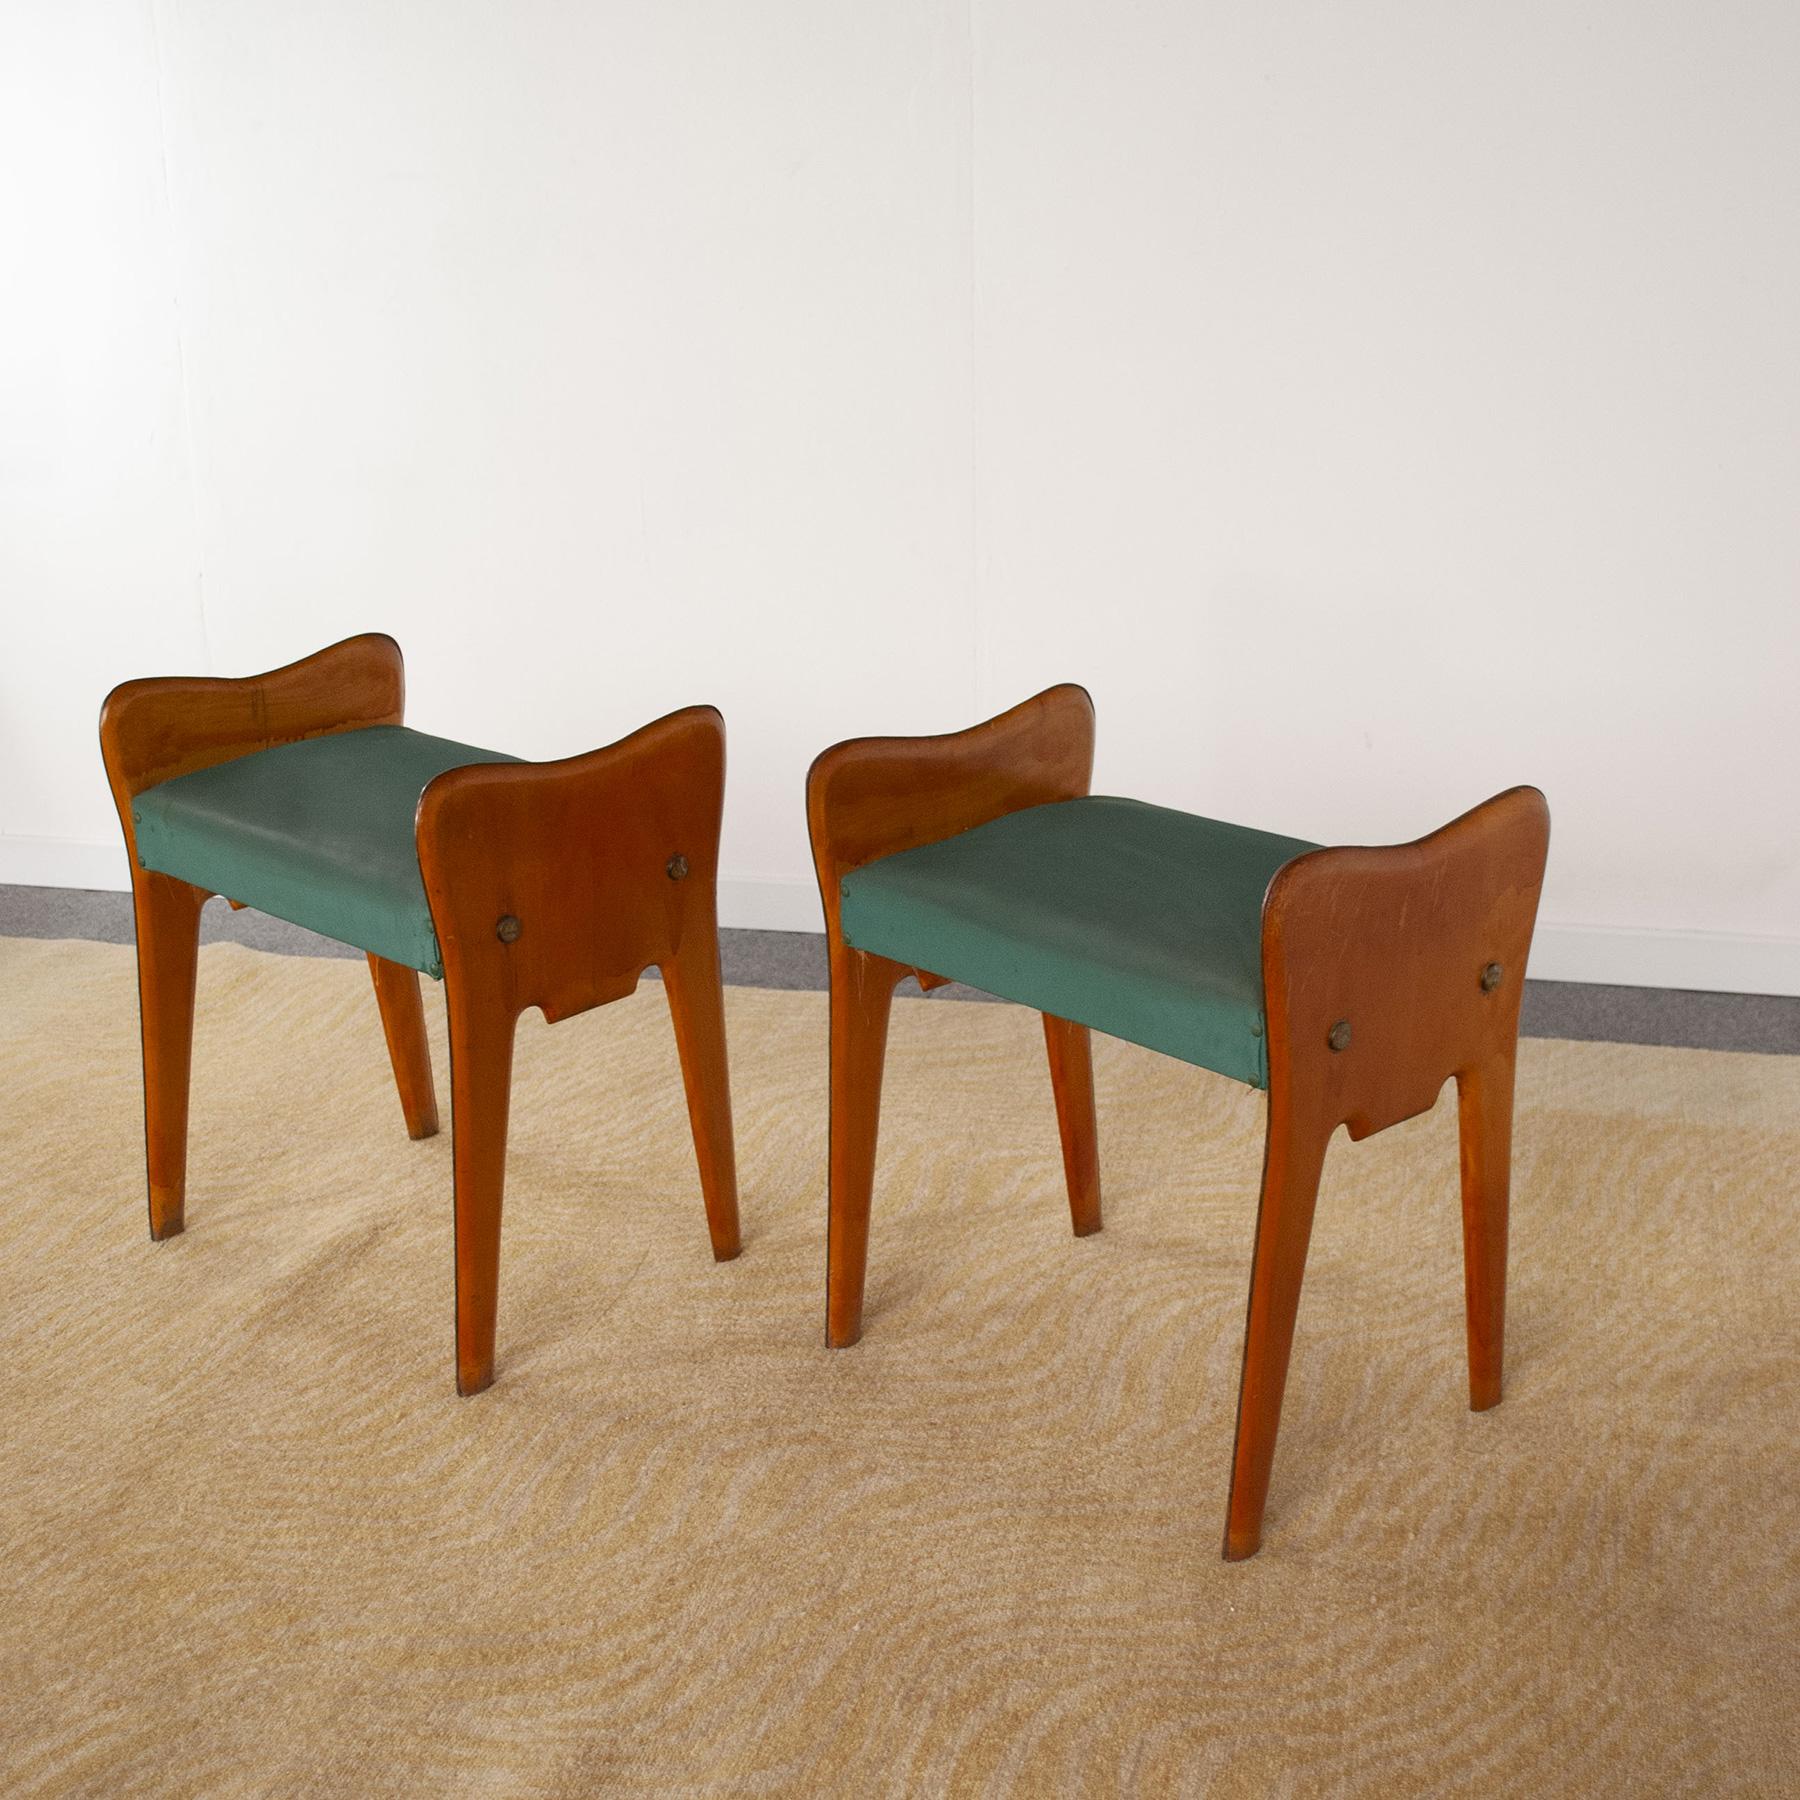 Mid-Century Modern Italian Mid-Century Pair of Wooden Benches from the 1950s For Sale